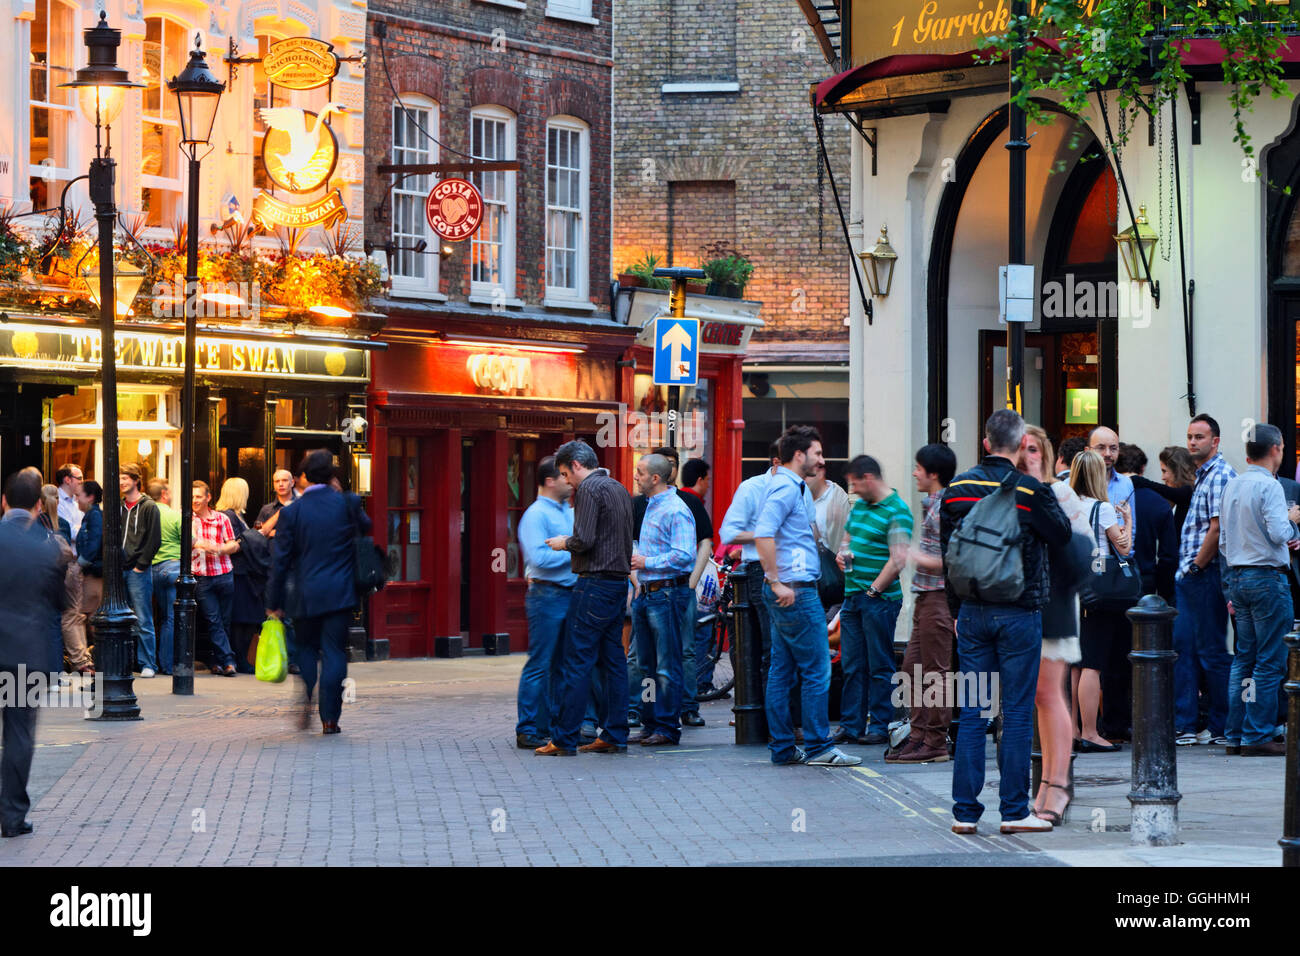 The Roundhouse Pub in Garrick Street, West End, London, England, United Kingdom Stock Photo